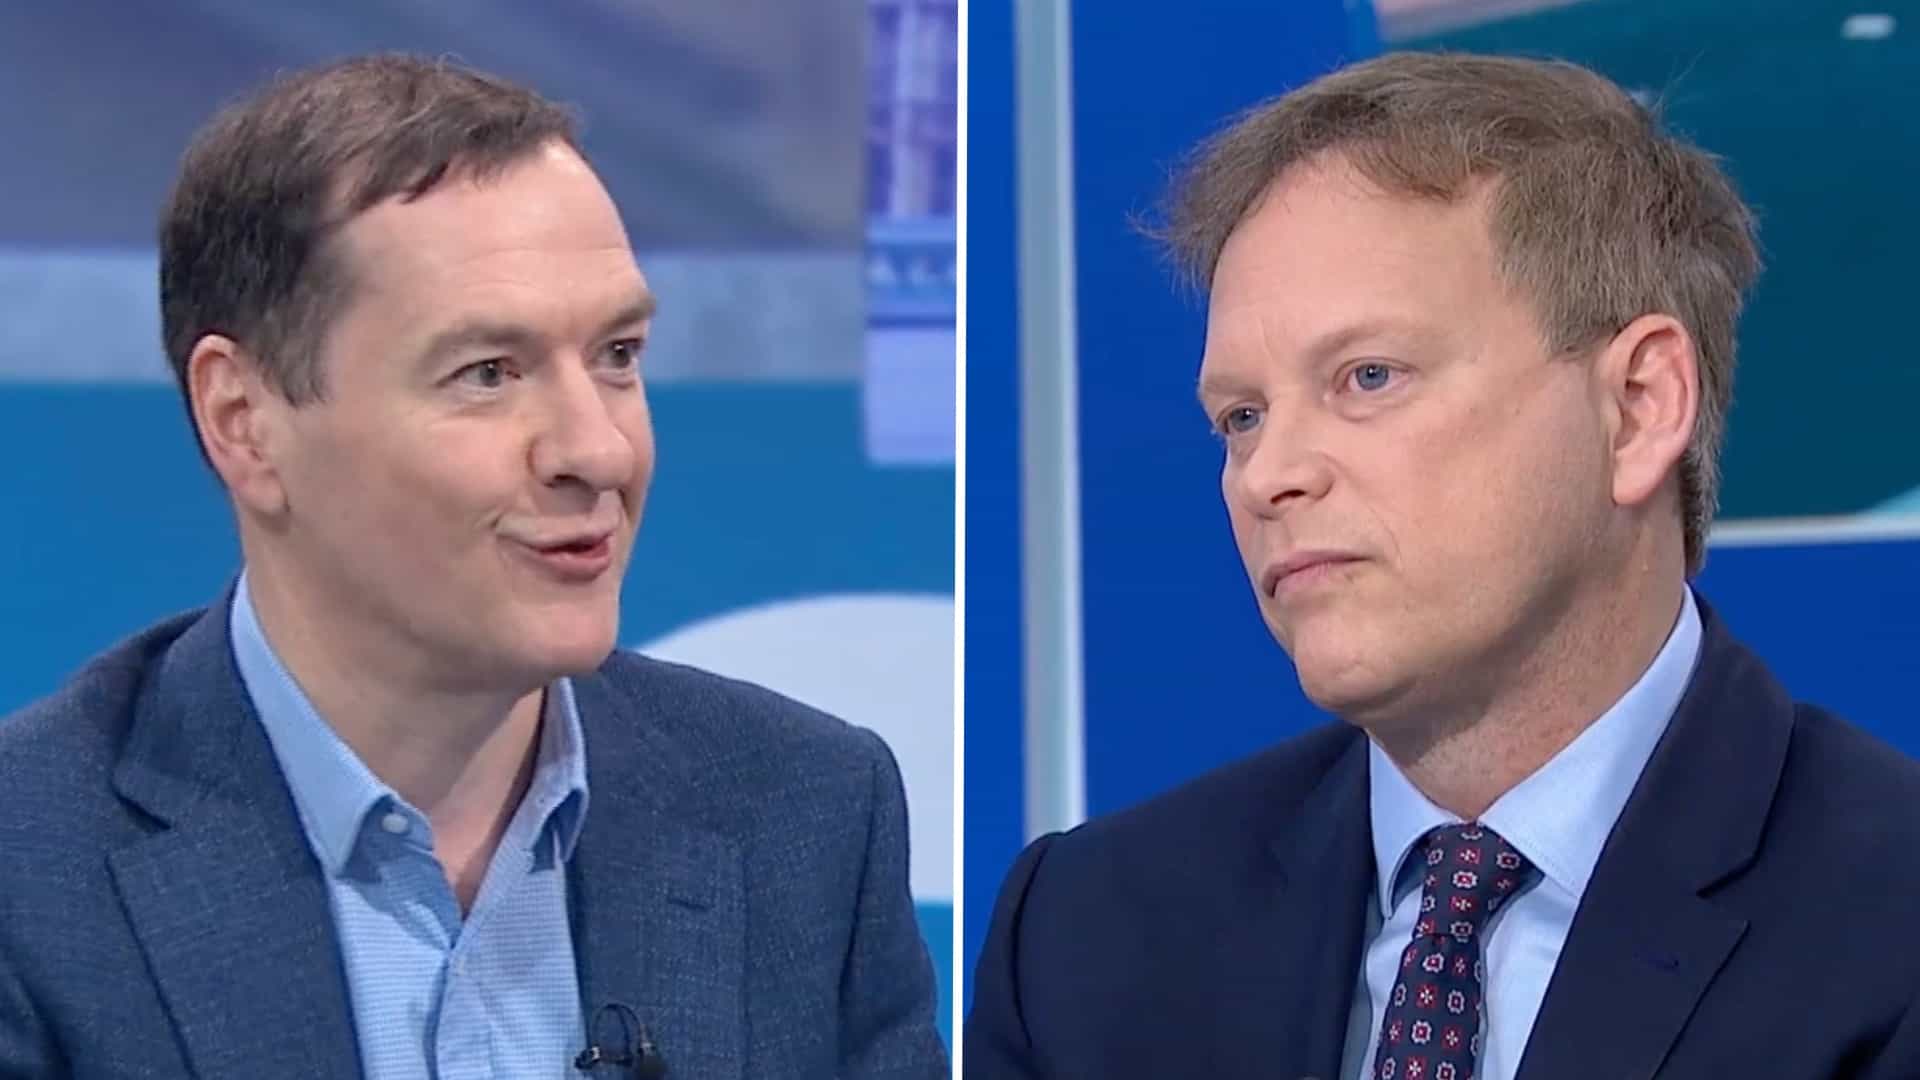 George Osborne tells Grant Shapps Brexit is the reason ‘Britain is stagnating’